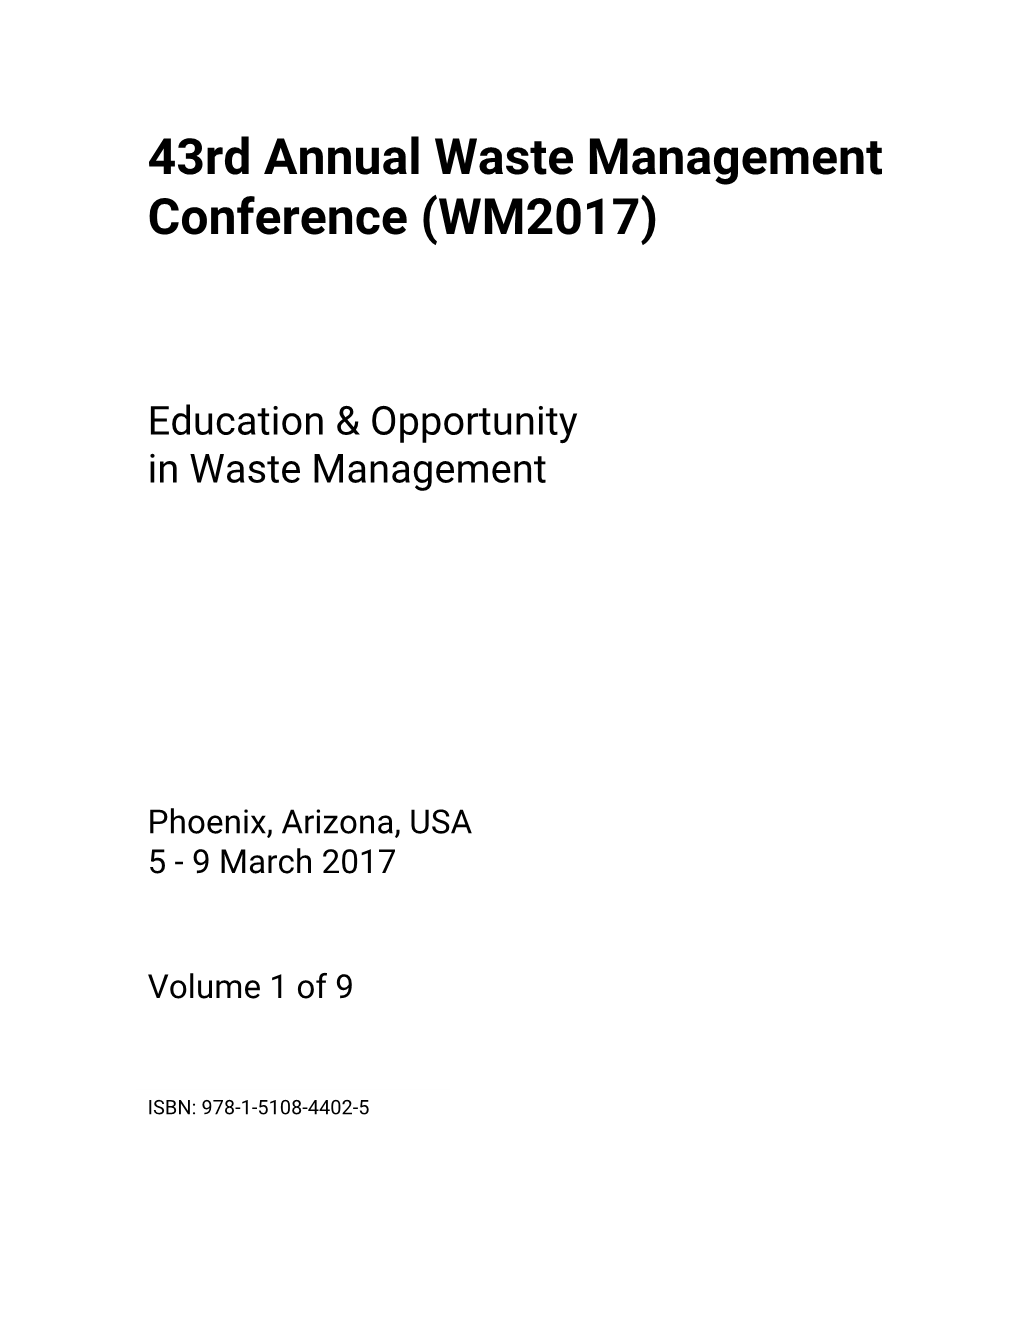 43Rd Annual Waste Management Conference (WM2017)